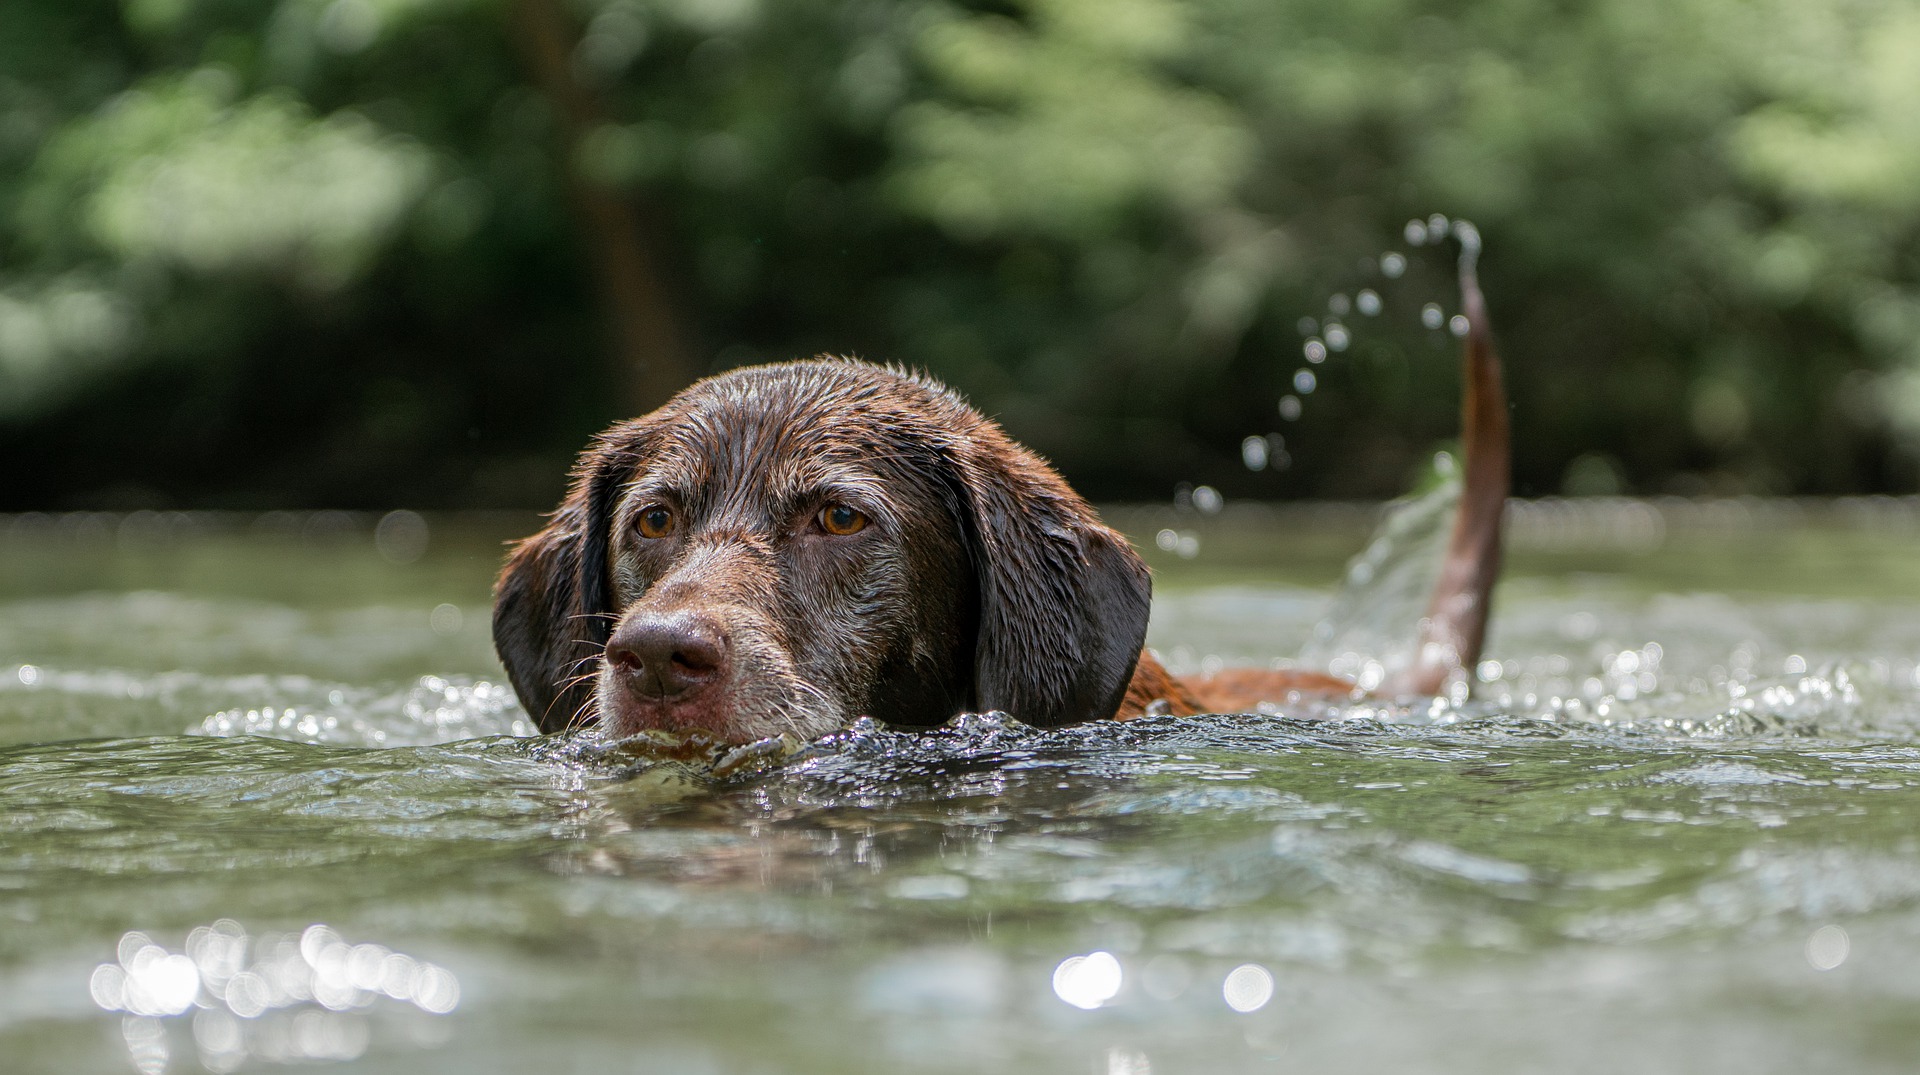 Protect Your Dogs: Avoid Blue-Green Algae for Their Safety